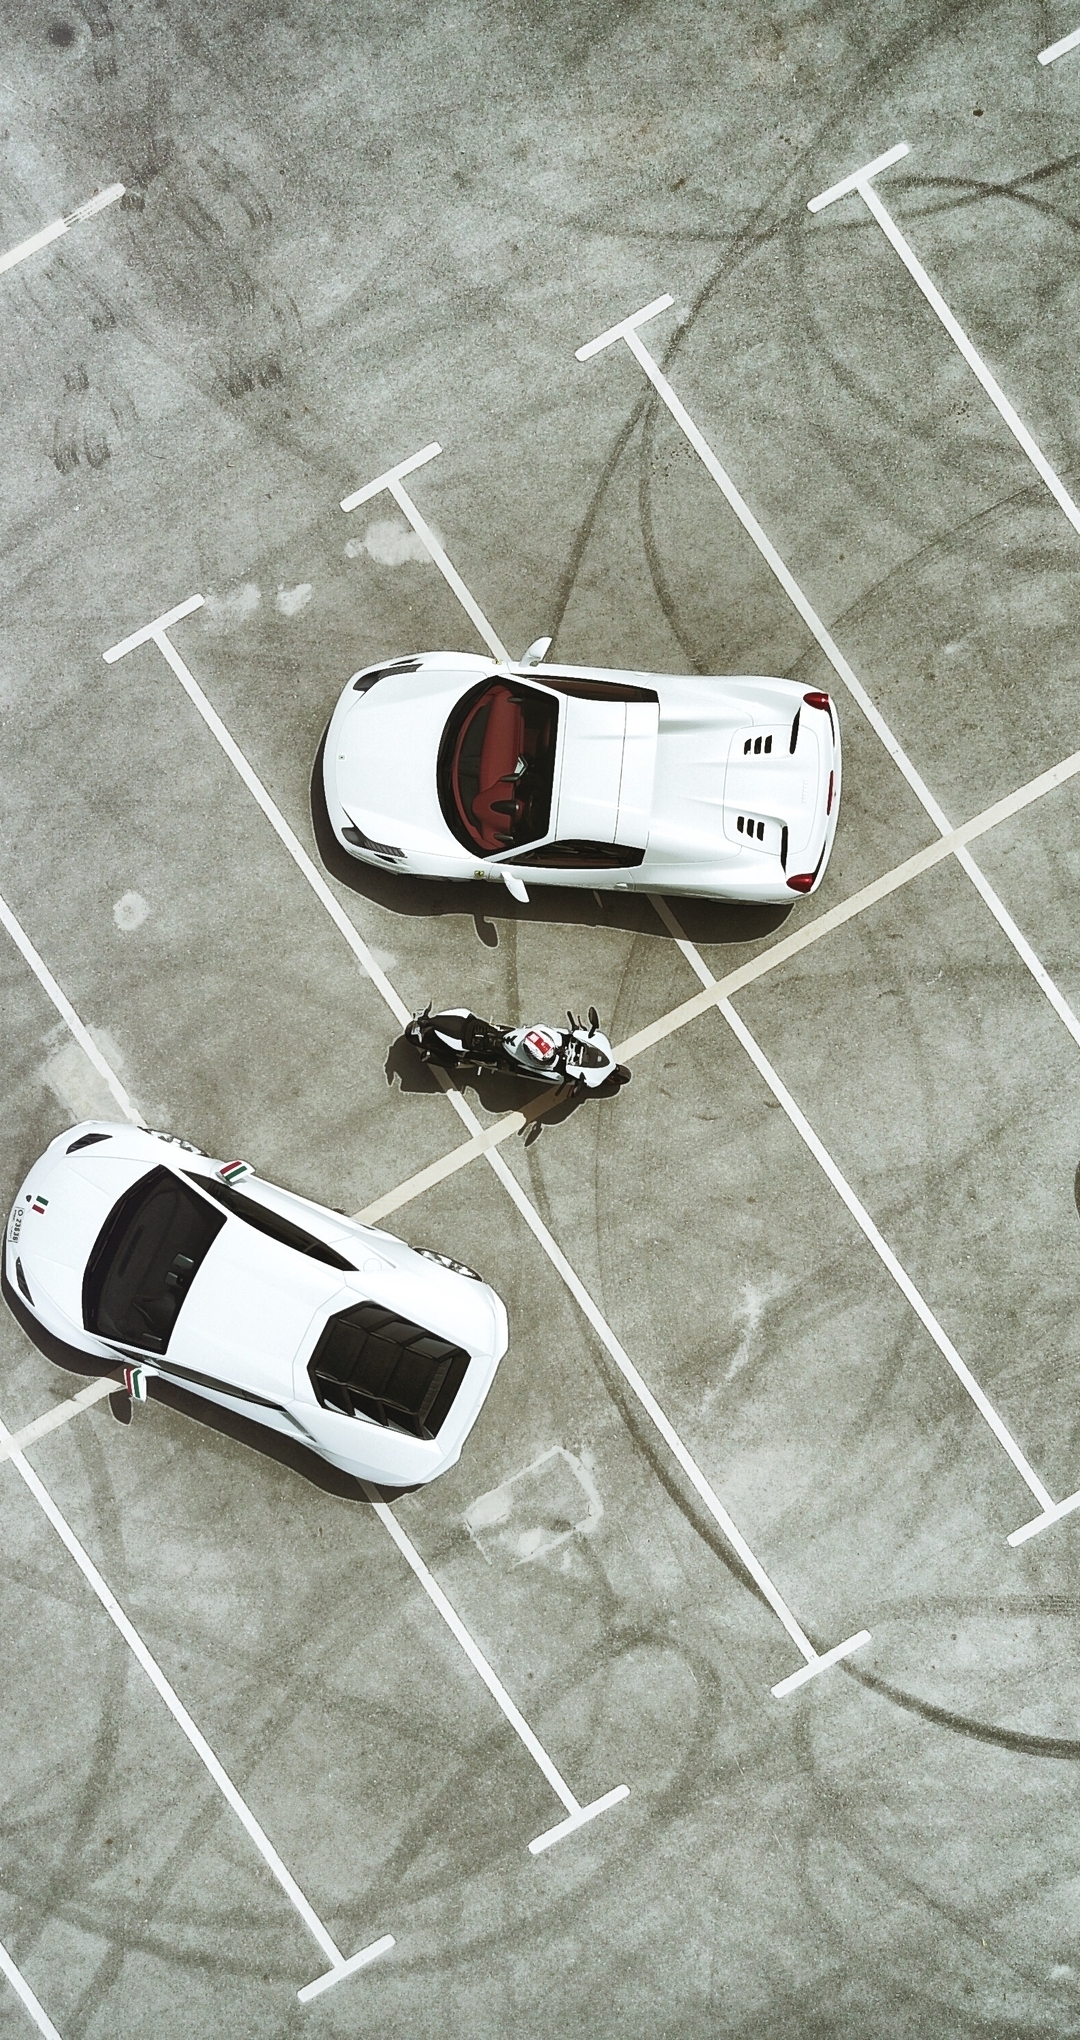 Image: Car, motorcycle, parking, top view, white, tire tracks